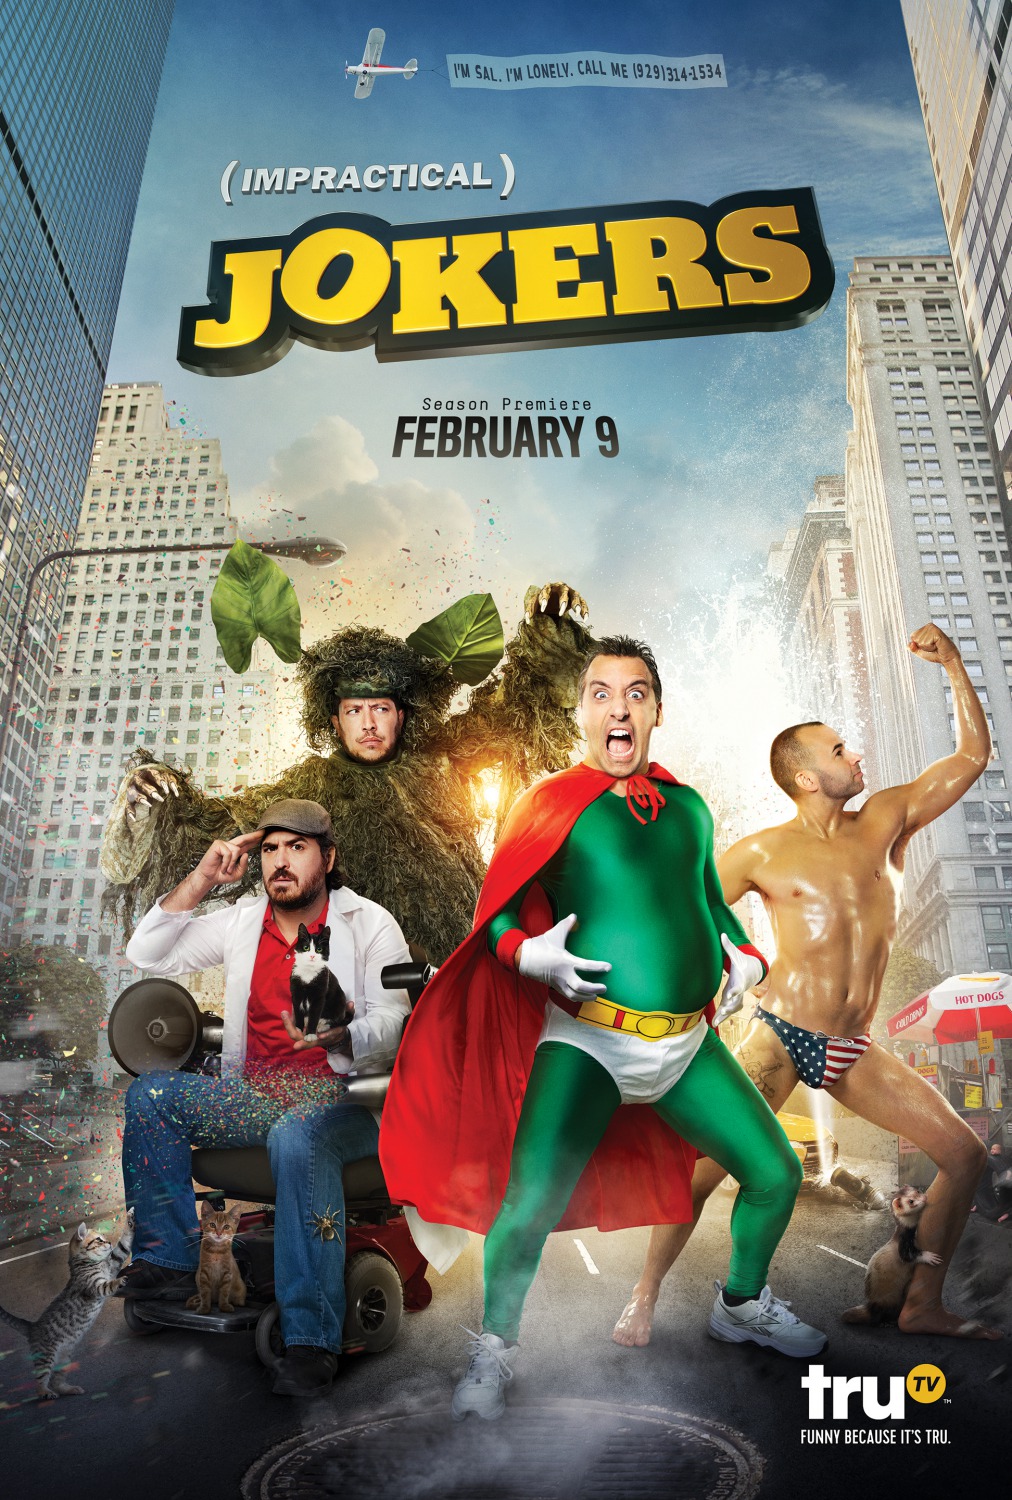 Extra Large TV Poster Image for Impractical Jokers (#7 of 9)